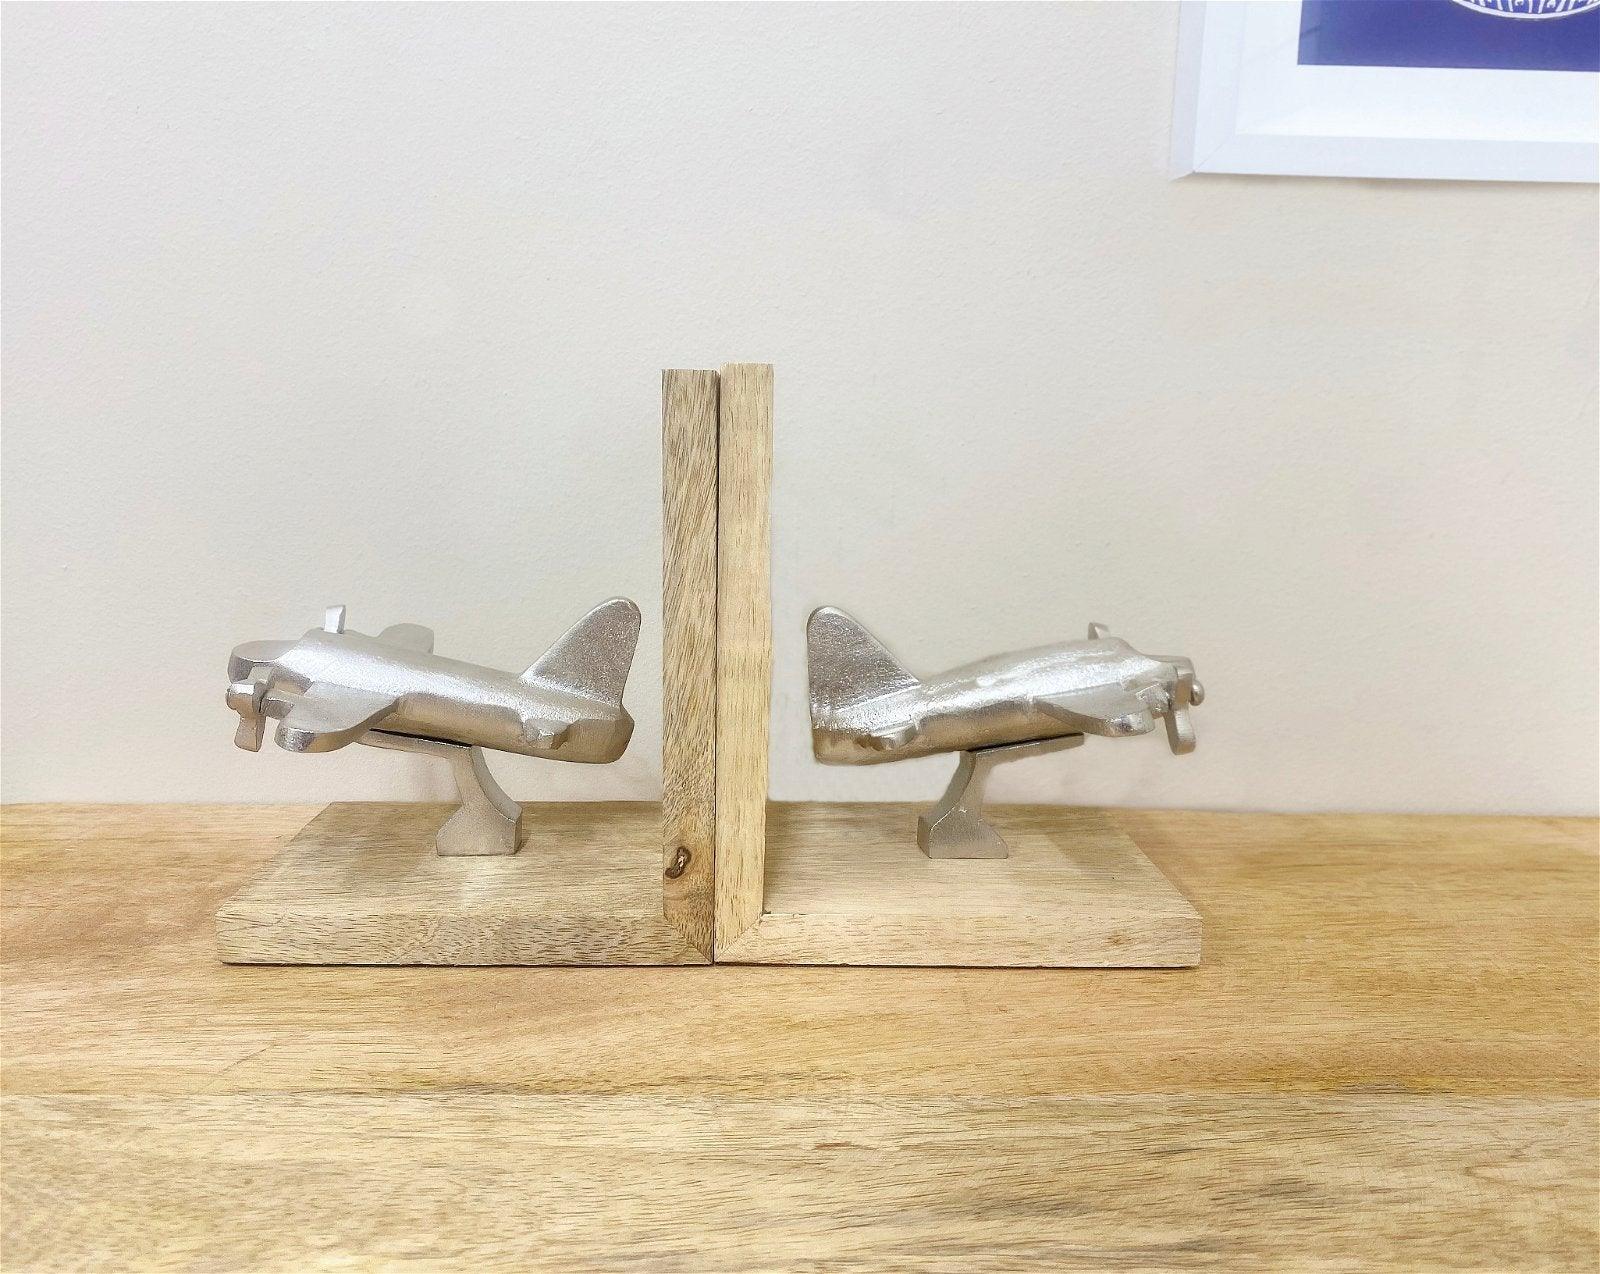 View Set of Two Aeroplane Bookends information